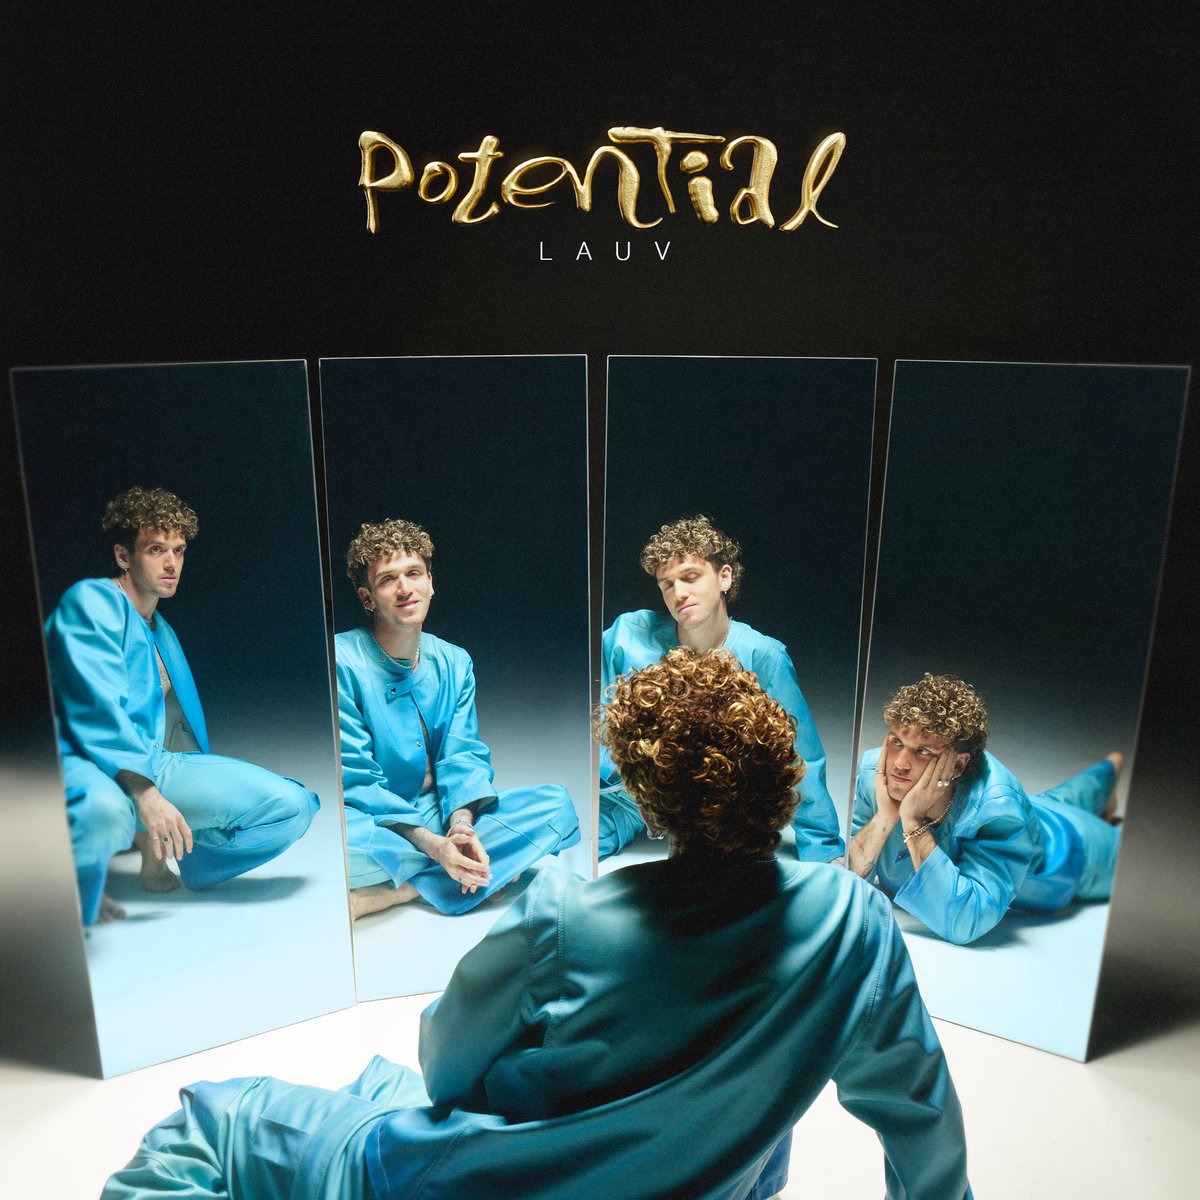 POTENTIAL COMES OUT WEDNESDAY APRIL 24!!!! OH EM GEEE CAN YOU FEEL THE EXCITEMENT?!?!? lauv.ffm.to/potential